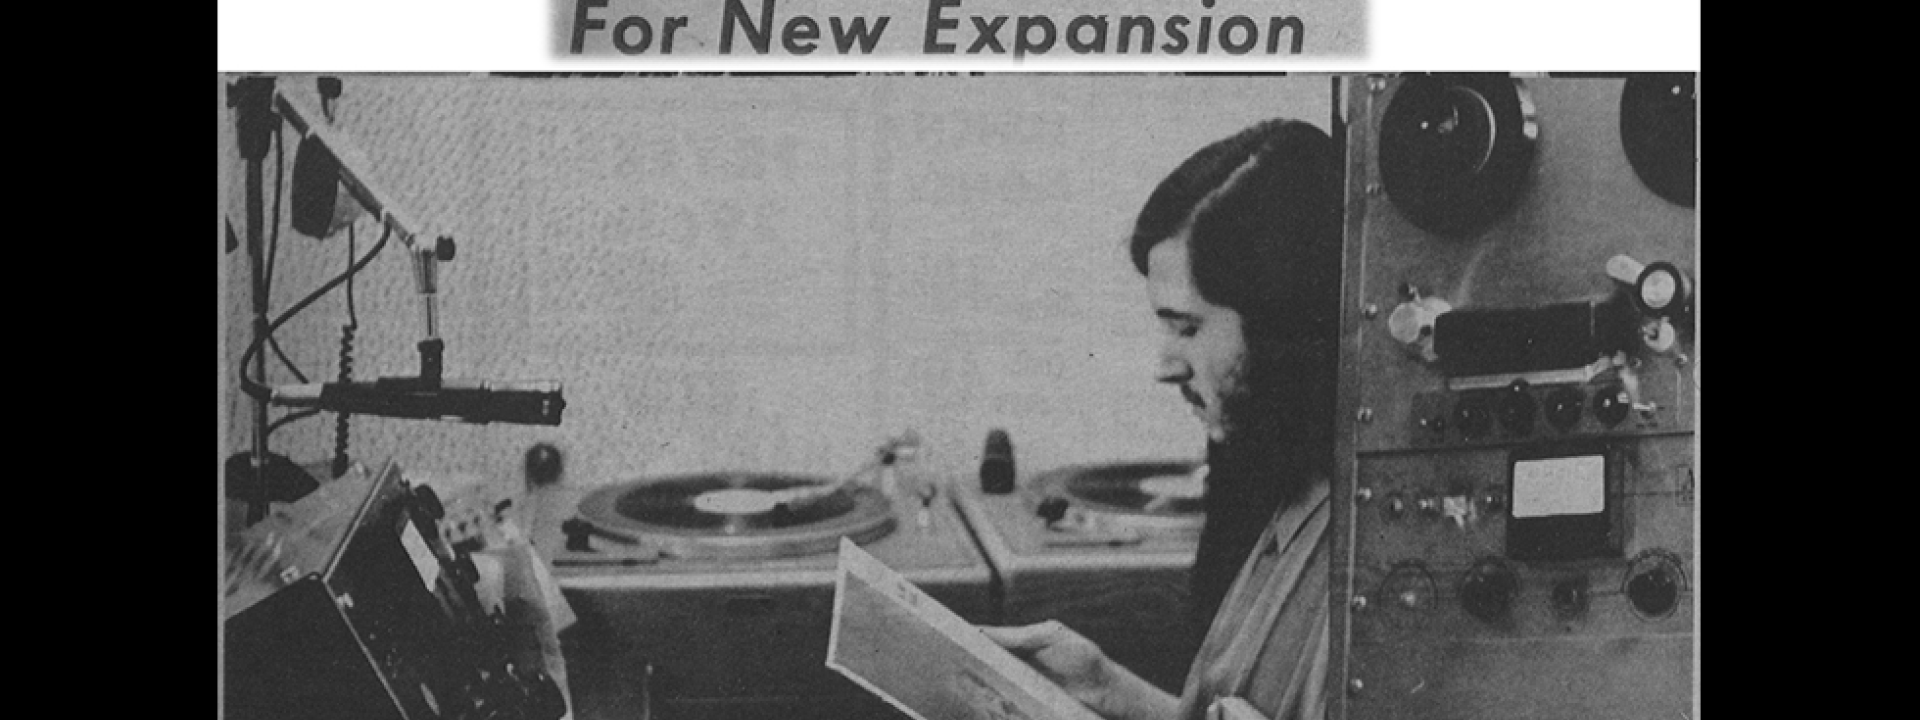 Newspaper clipping with man in radio station. Text: Radio Station Plans for Expansion